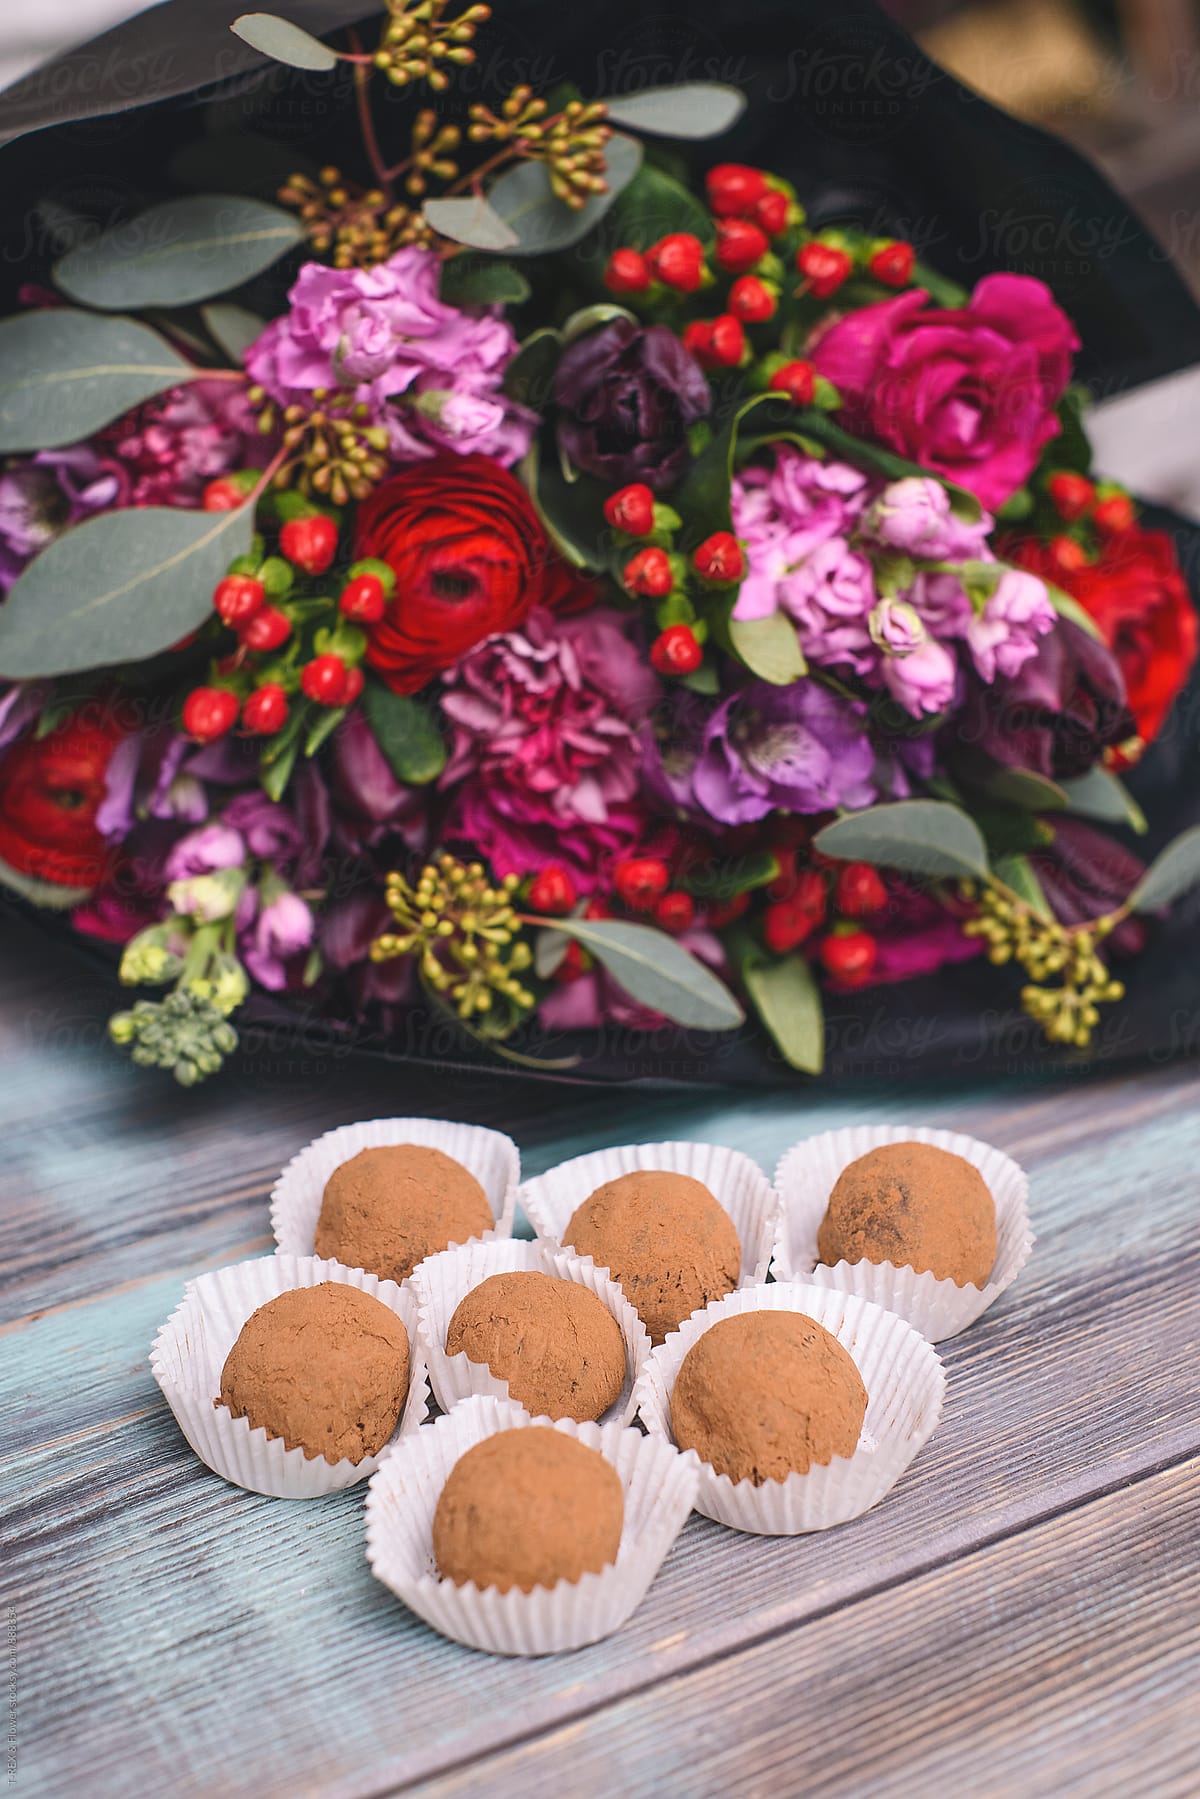 Delicious chocolate truffles against of bright bouquet